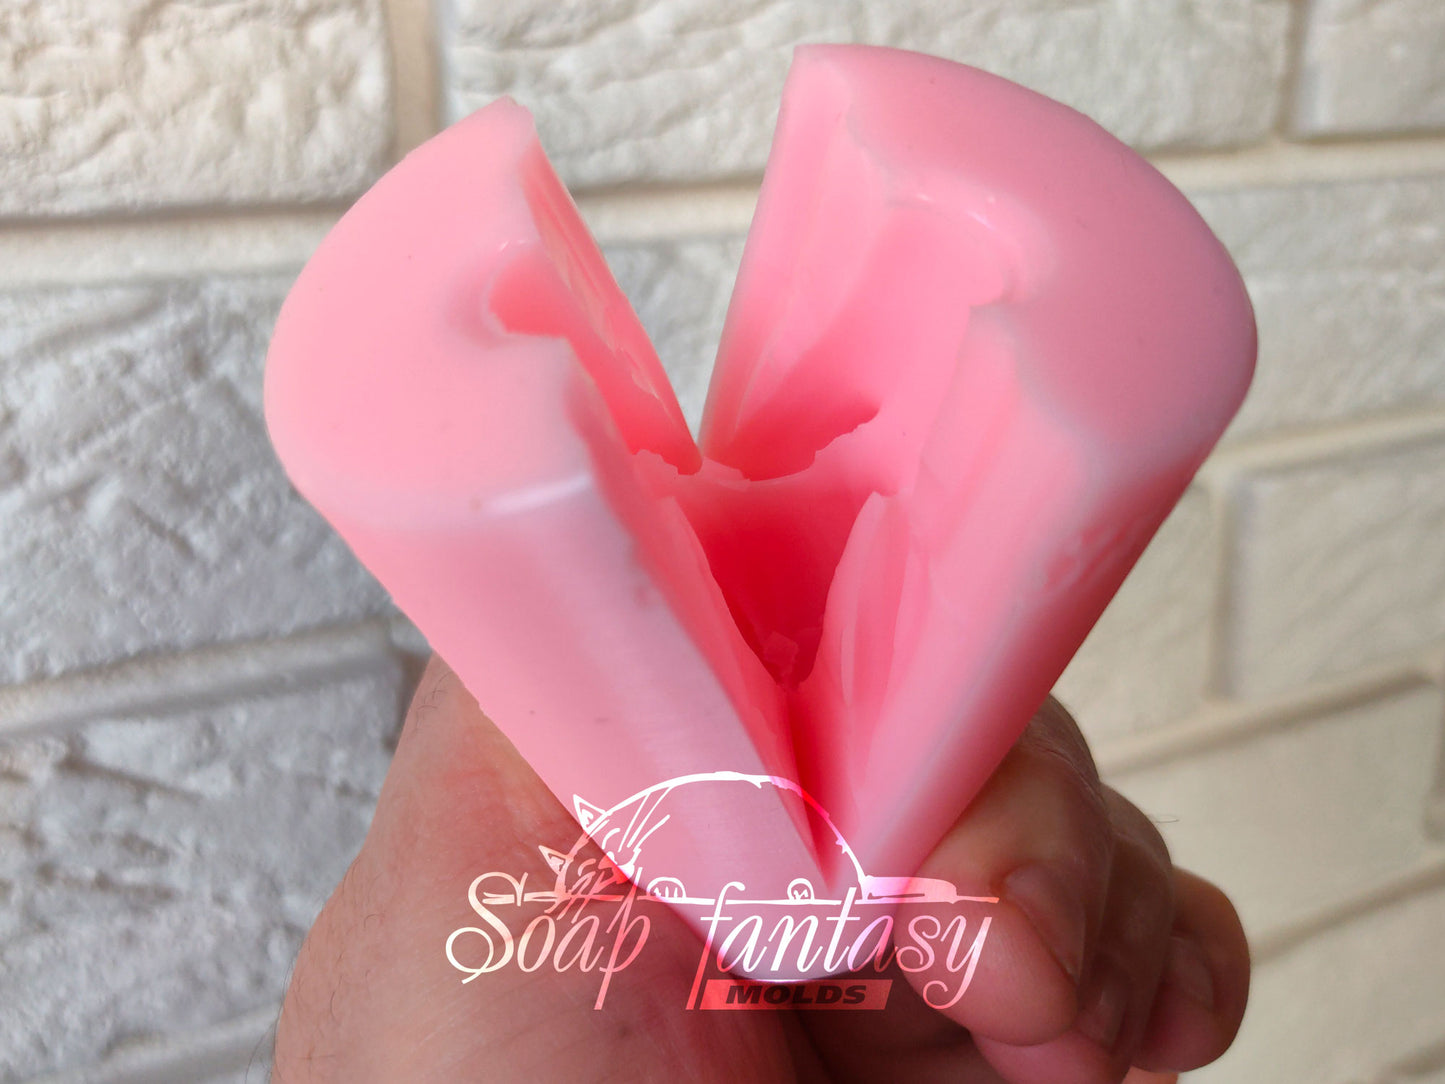 Alstroemeria lily bud with leaves silicone mold for soap making